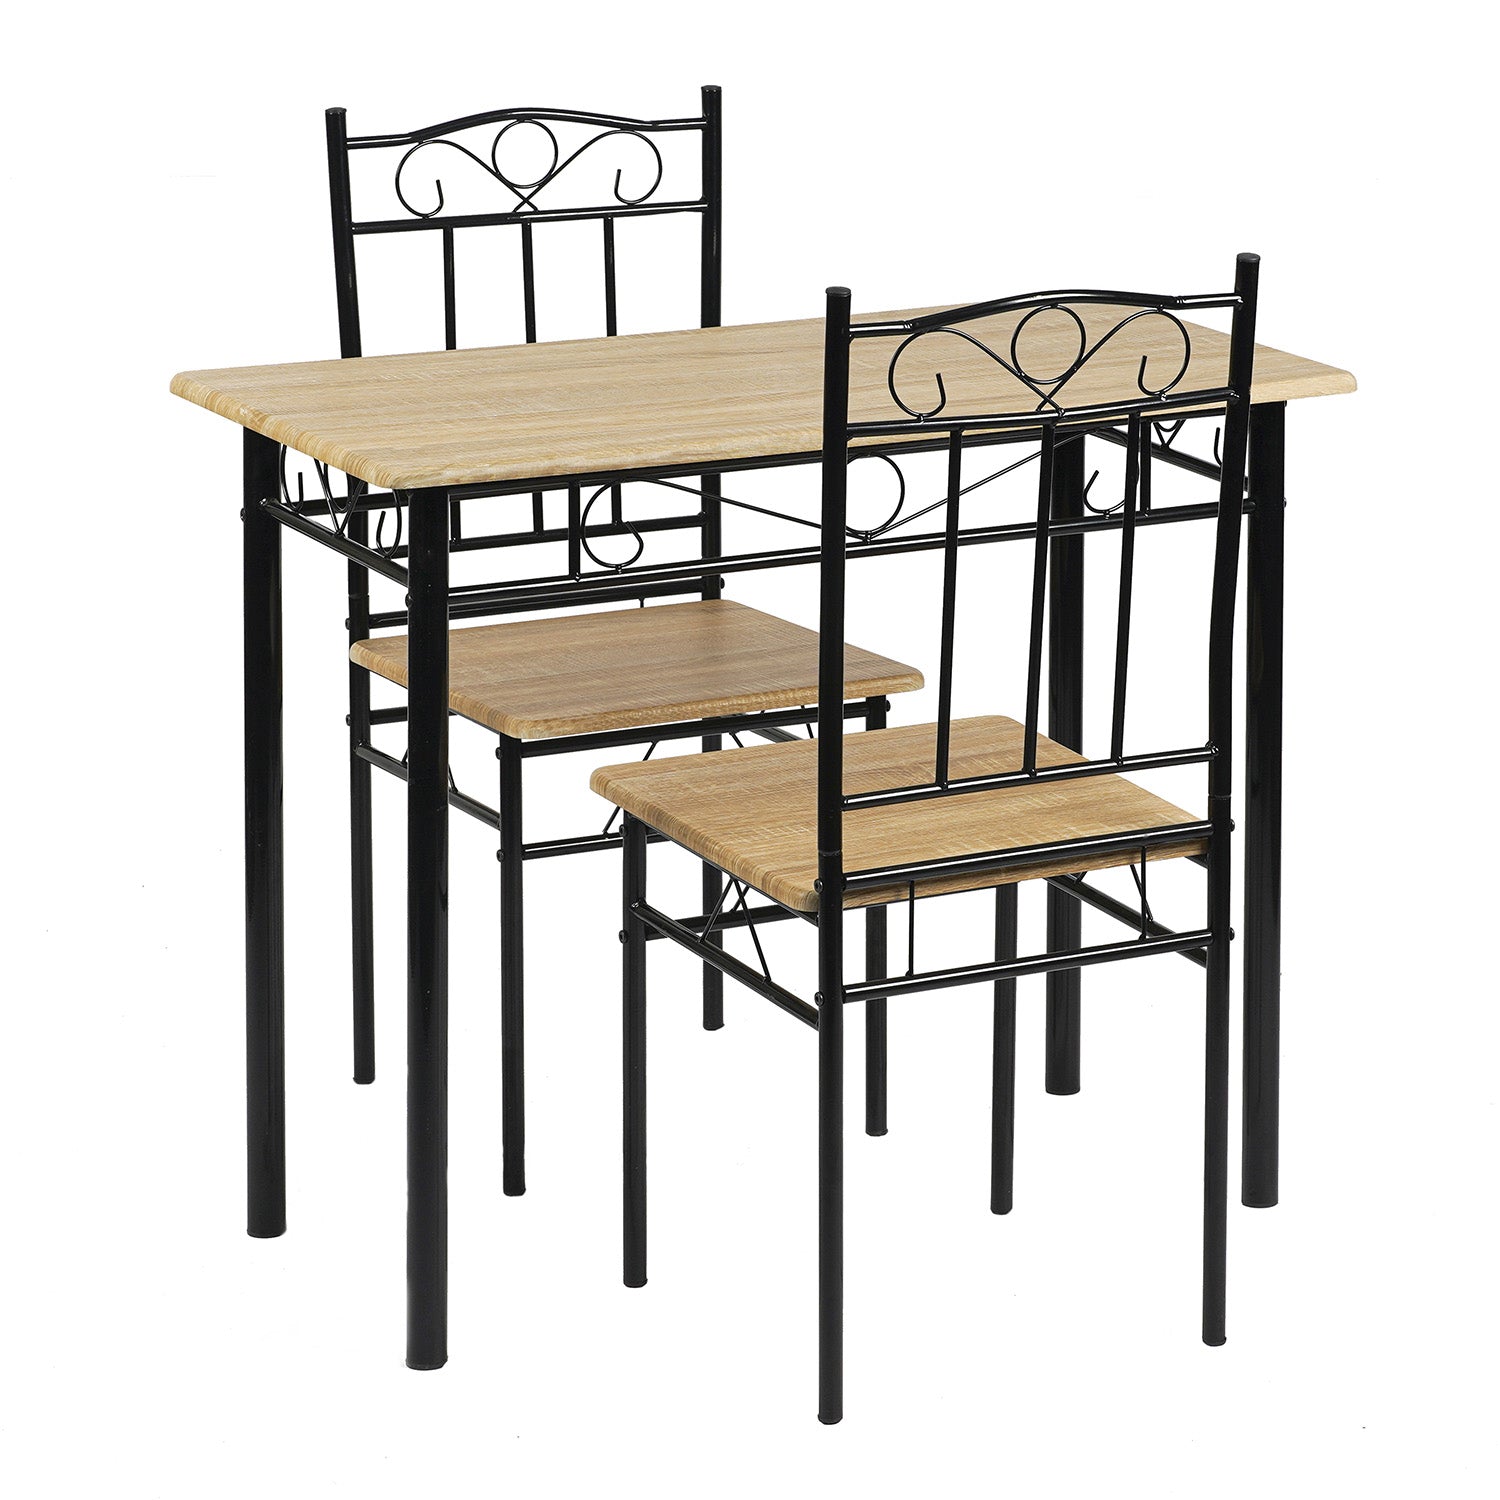 NORSEMAN 3-Piece Dining Set, Rectangular Dining Table with 2 Chairs 90*48*75cm - Colors Available